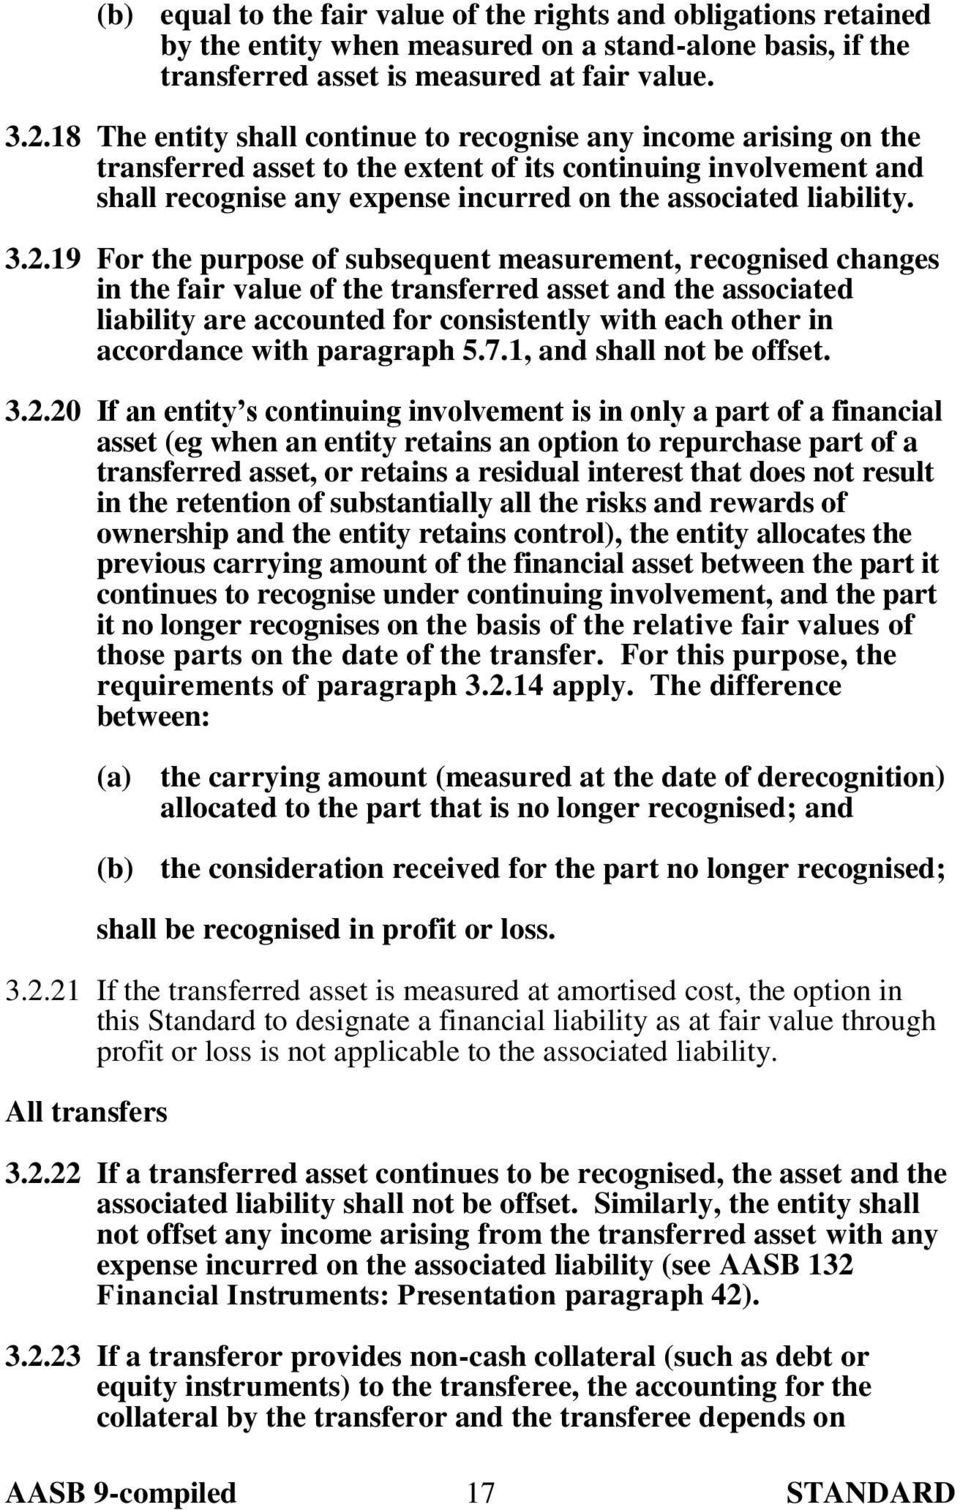 3.2.19 For the purpose of subsequent measurement, recognised changes in the fair value of the transferred asset and the associated liability are accounted for consistently with each other in